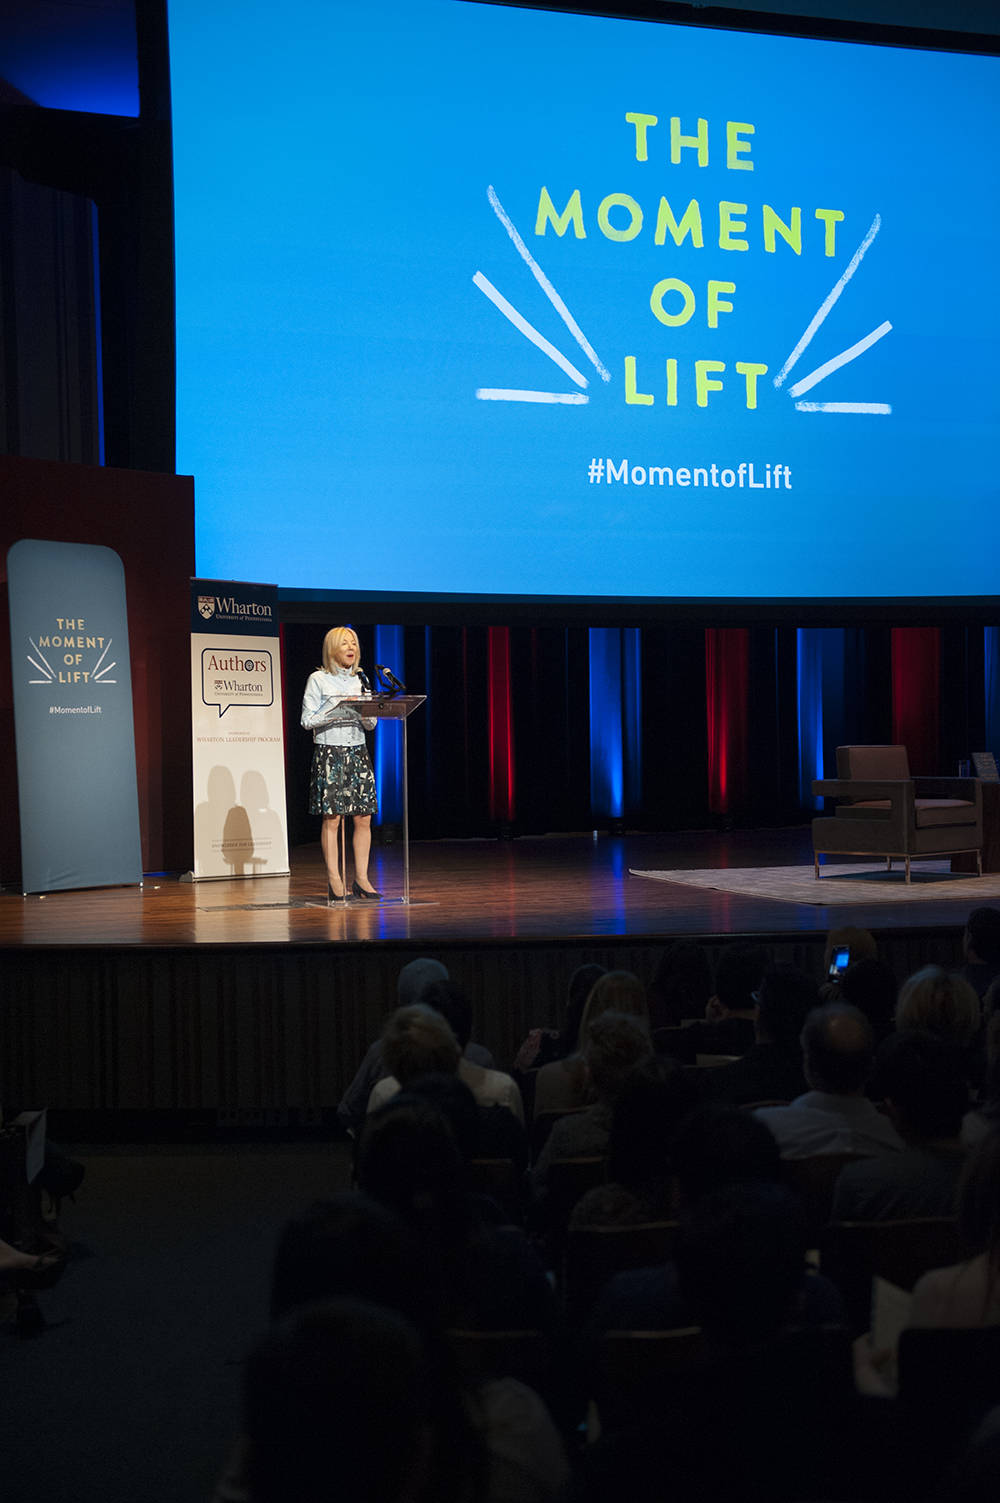 Amy Gutmann speaking on stage at a podium under a large screen reading #MomentofLift